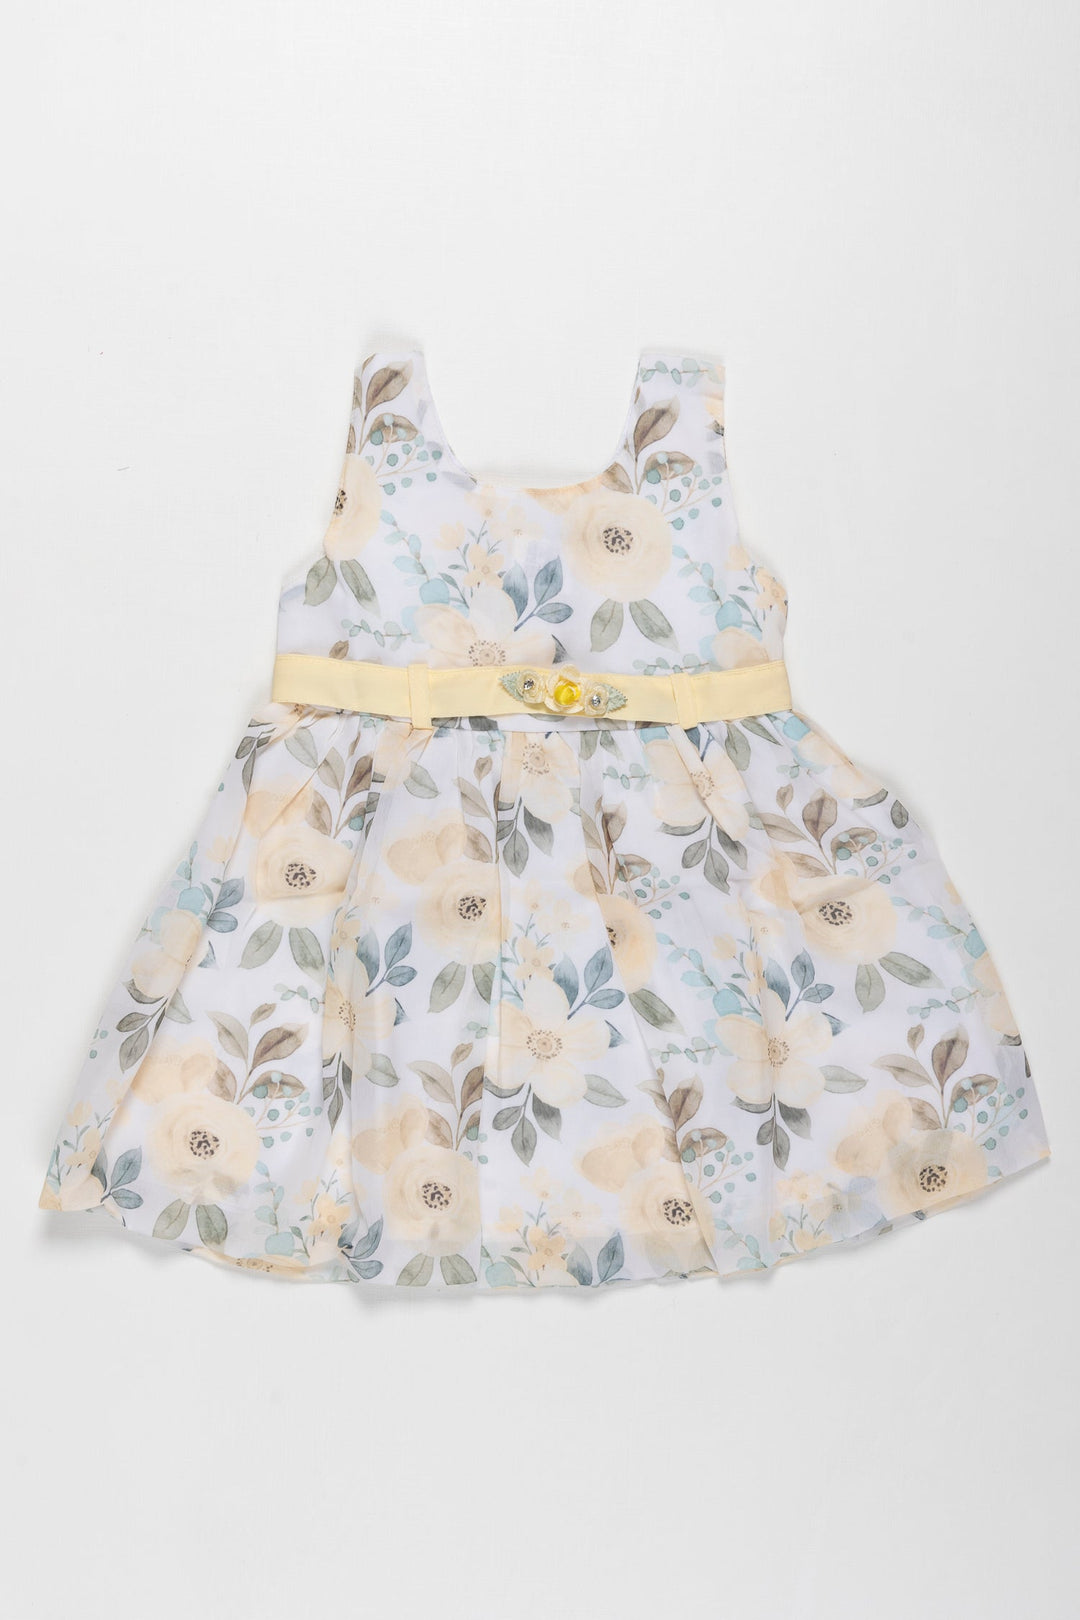 The Nesavu Baby Fancy Frock Sunshine Blossom Yellow Floral Printed Frock for Baby Girls - Garden Party Elegance Nesavu 14 (6M) / Yellow / Georgette BFJ526B-14 Infant Girls Yellow Floral Cotton Frock | Perfect for Special Occasions | The Nesavu